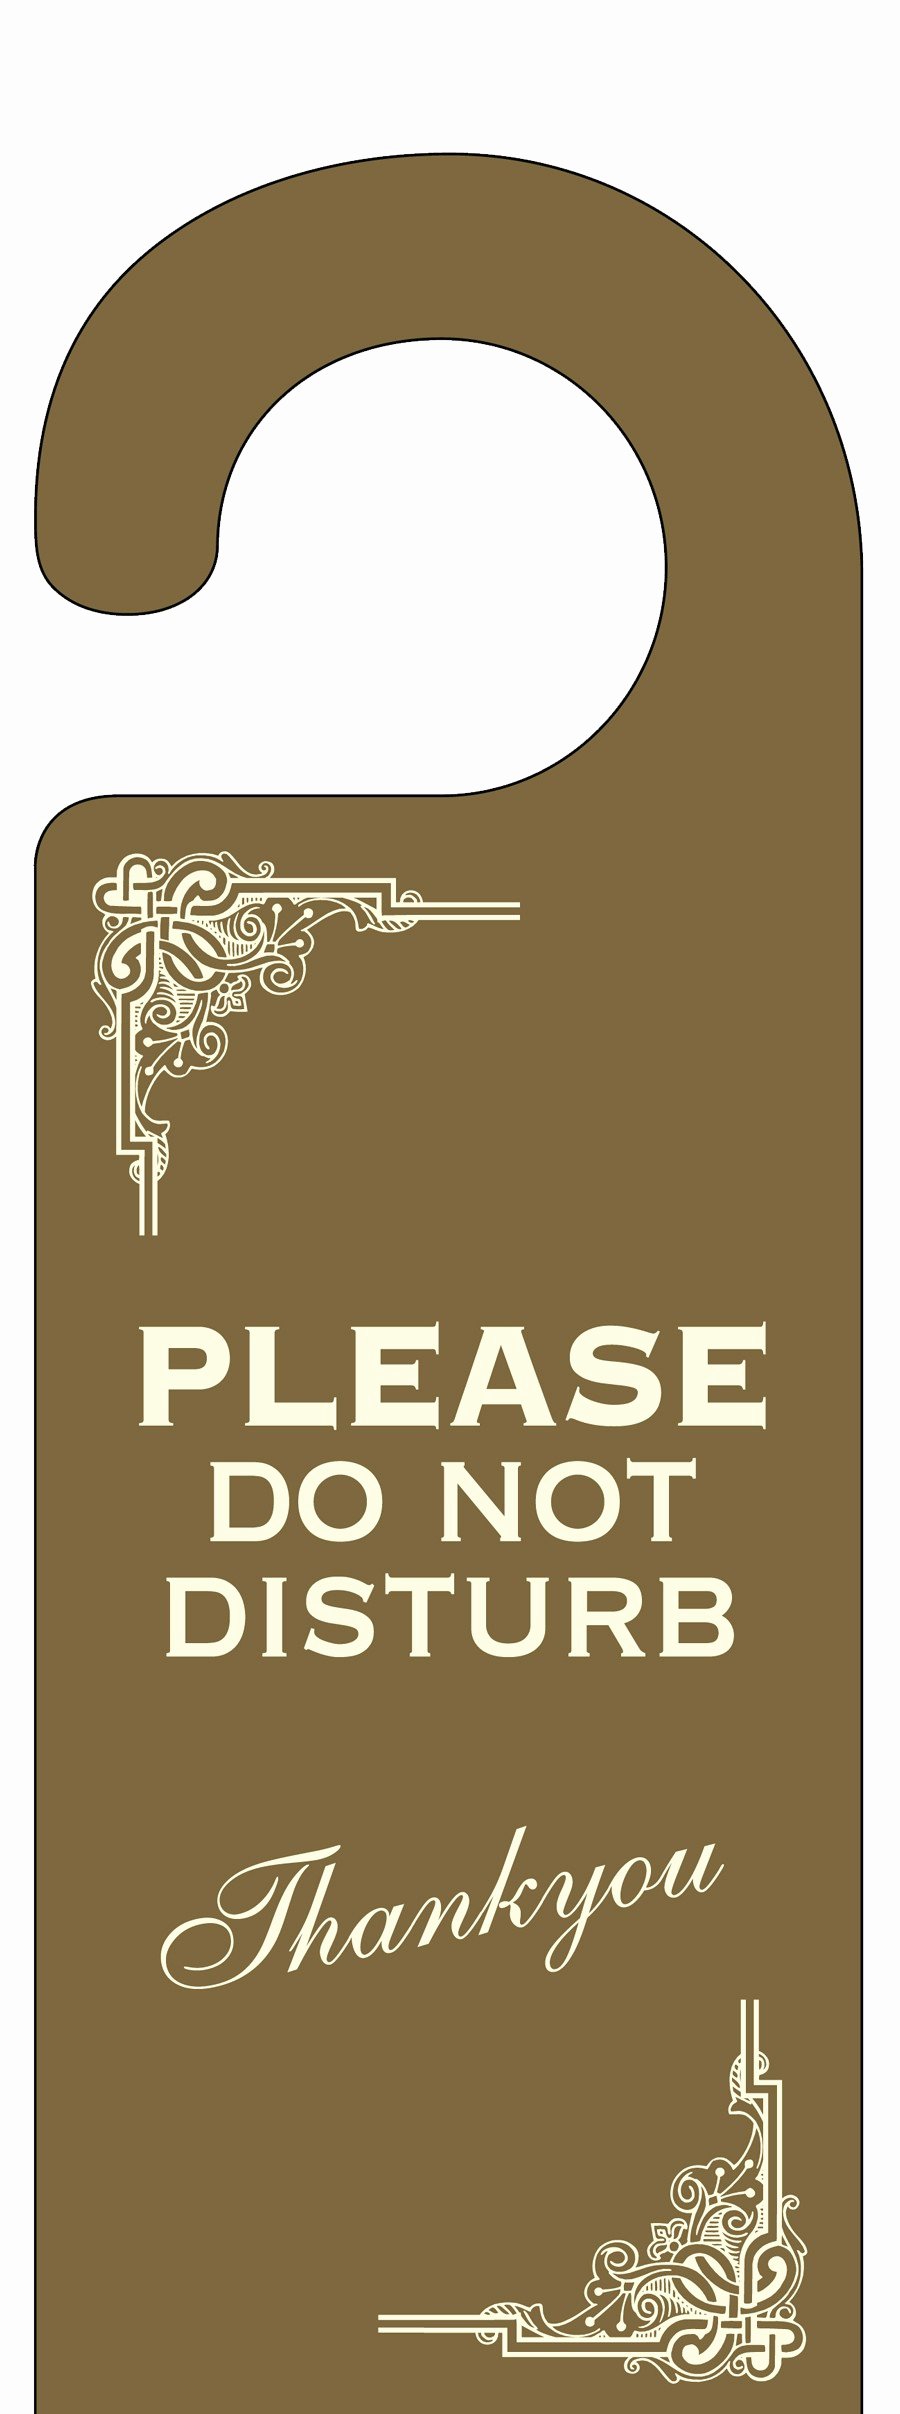 Do Not Disturb Sign Templates Lovely 1000 Images About St Paddy S Day On Pinterest